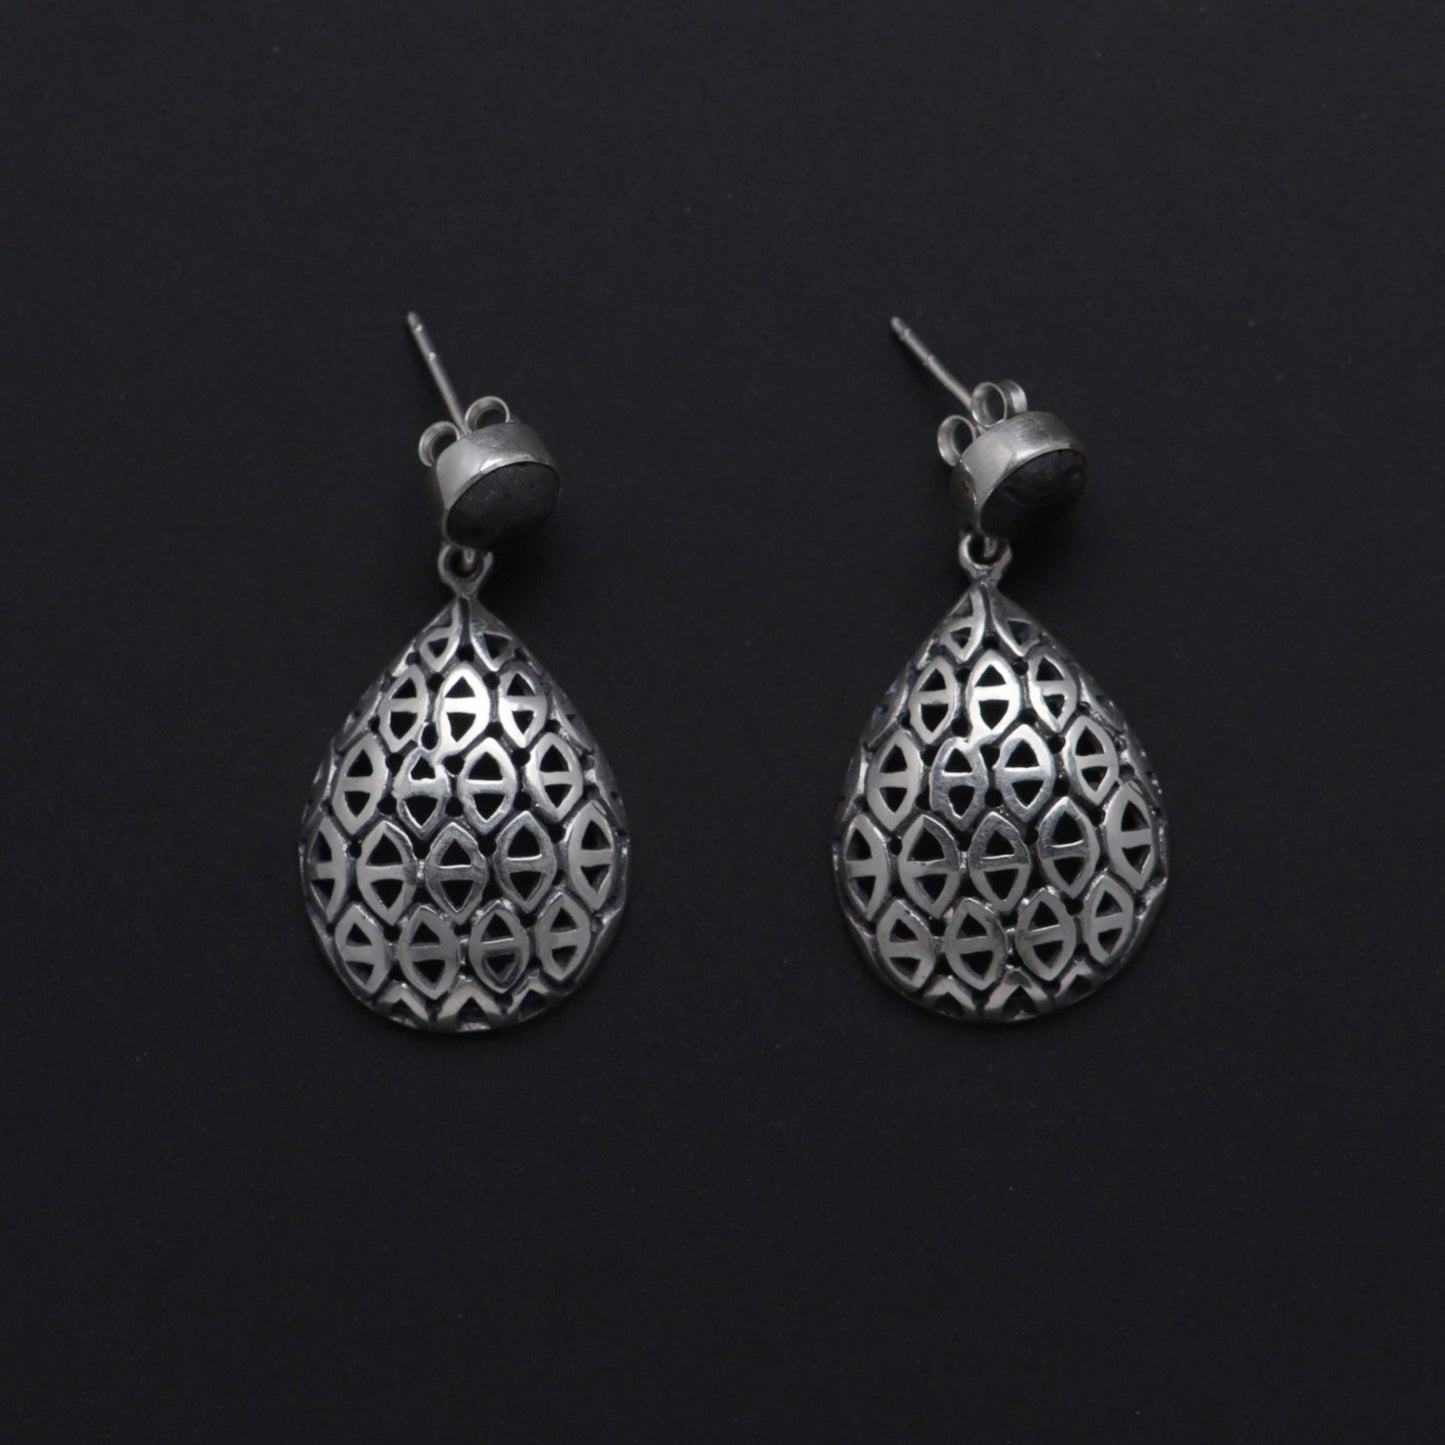 Kaldera Atelier Lilith & Lilith, tear Earrings in 925 Sterling Silver and Mount Agung Lava Stone